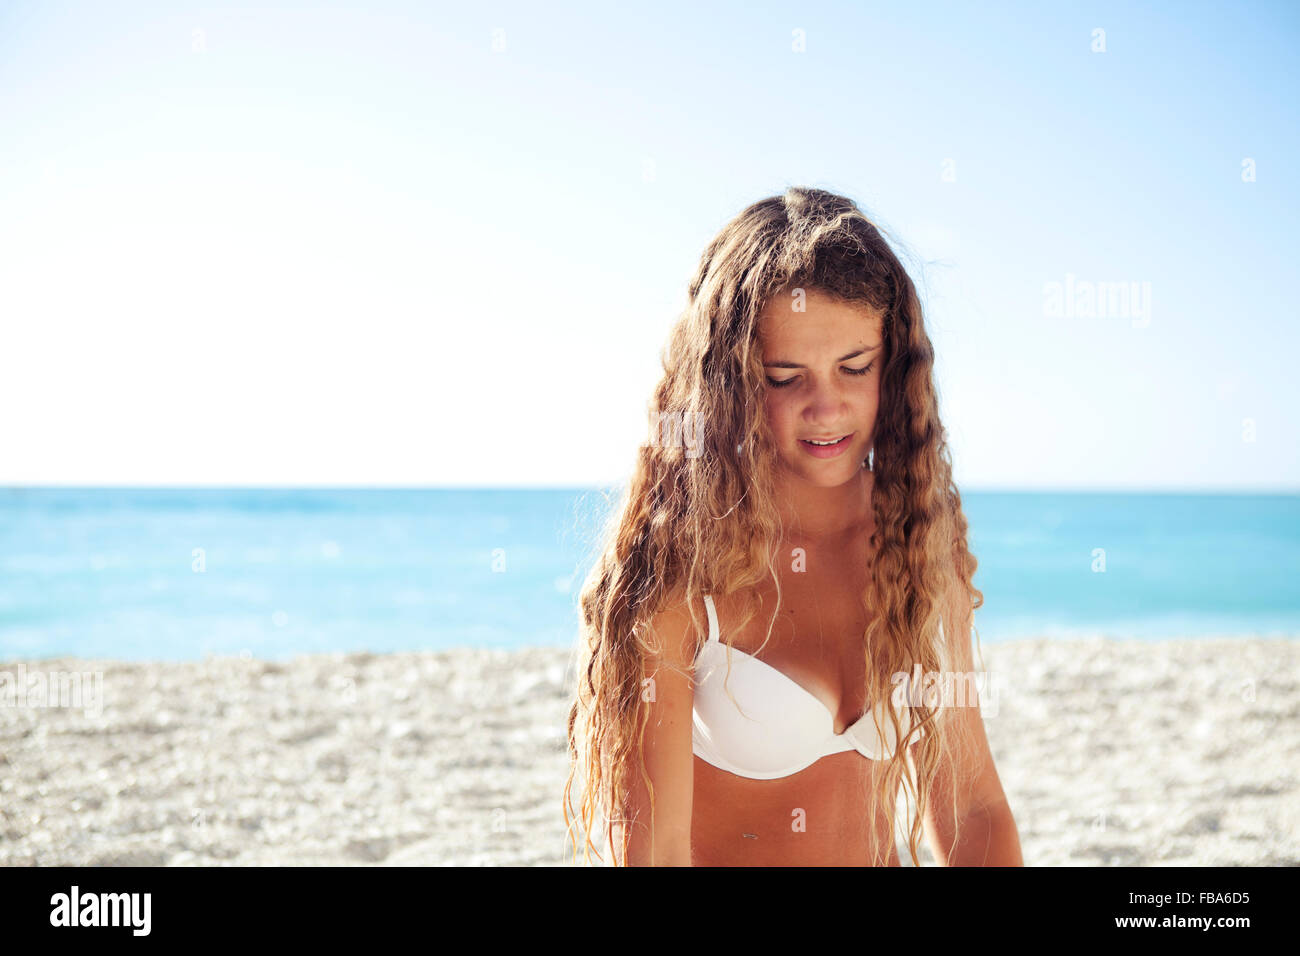 Young girl teenager looking down on a white beach with light blue ocean behind. Stock Photo